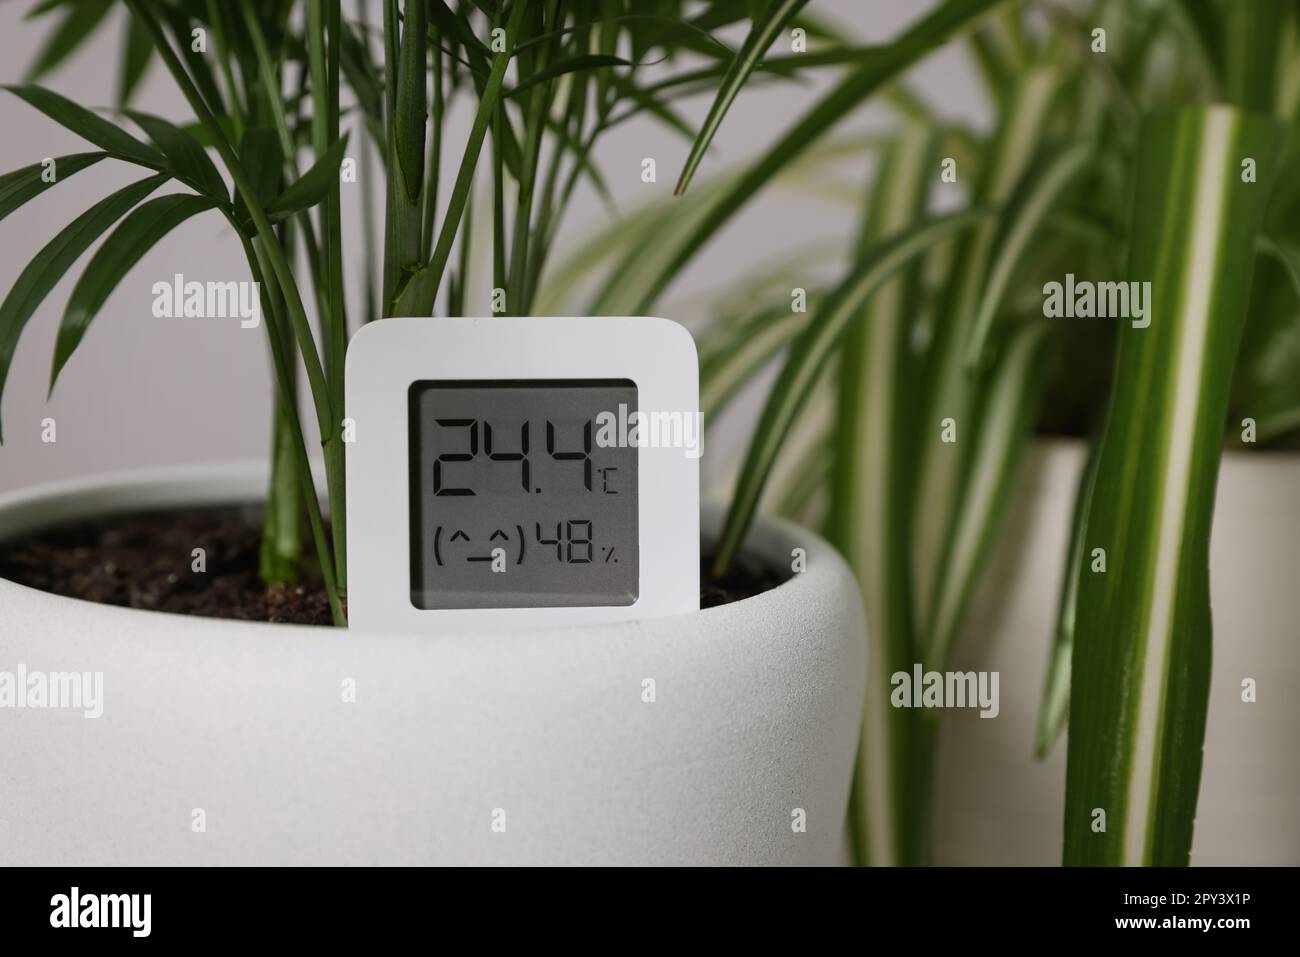 Digital Hygrometer With Thermometer And Plants On Chest Of Drawers